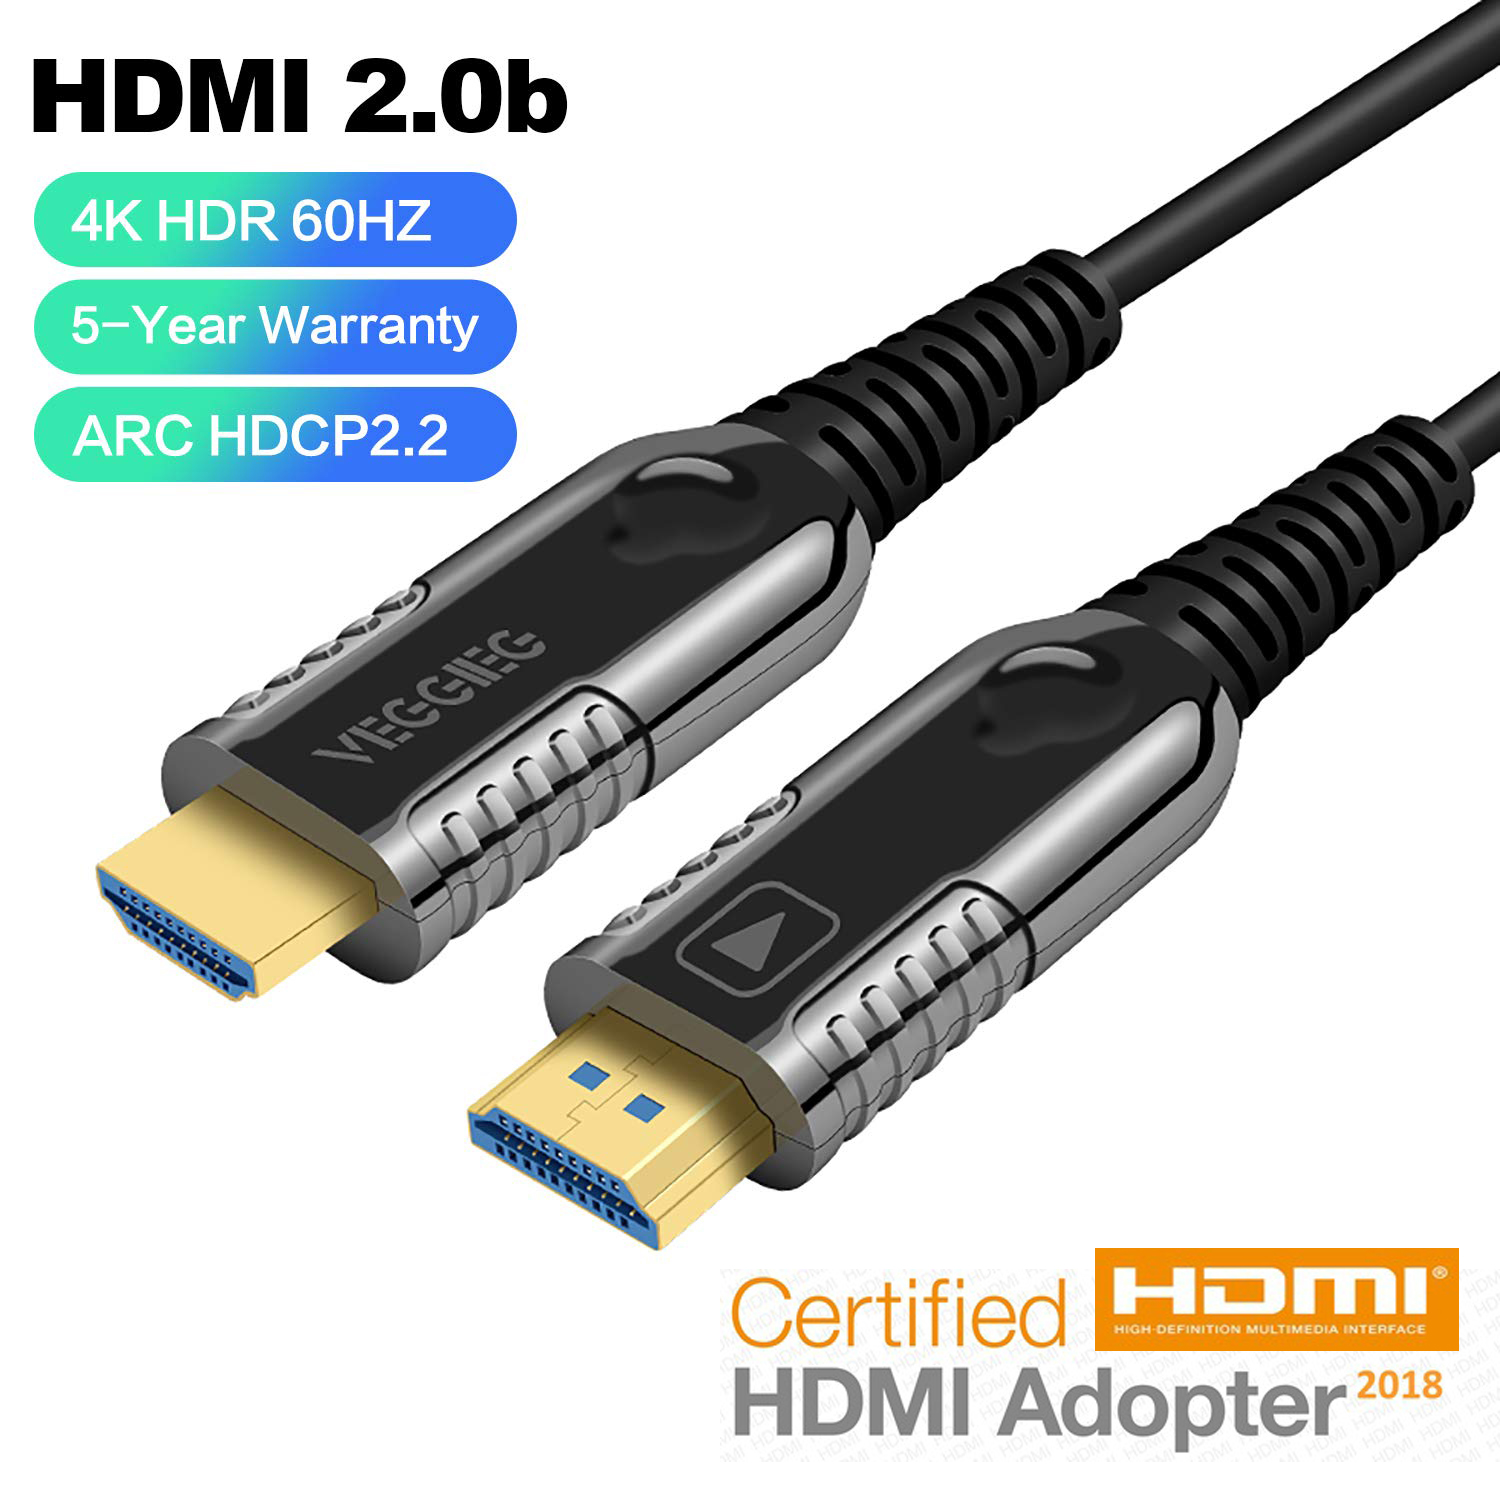 Individualitet kul Uhøfligt VEGGIEG Fiber Optic HDMI Cable, 4K Optical HDMI Cable Supports 4K@60Hz,  4:4:4 HDR, Dolby Vision, HDCP2.2, ARC, 3D, High Speed 18Gbps fits Long  Distance Transmission (50M,160ft) HDMI Cables - Newegg.com